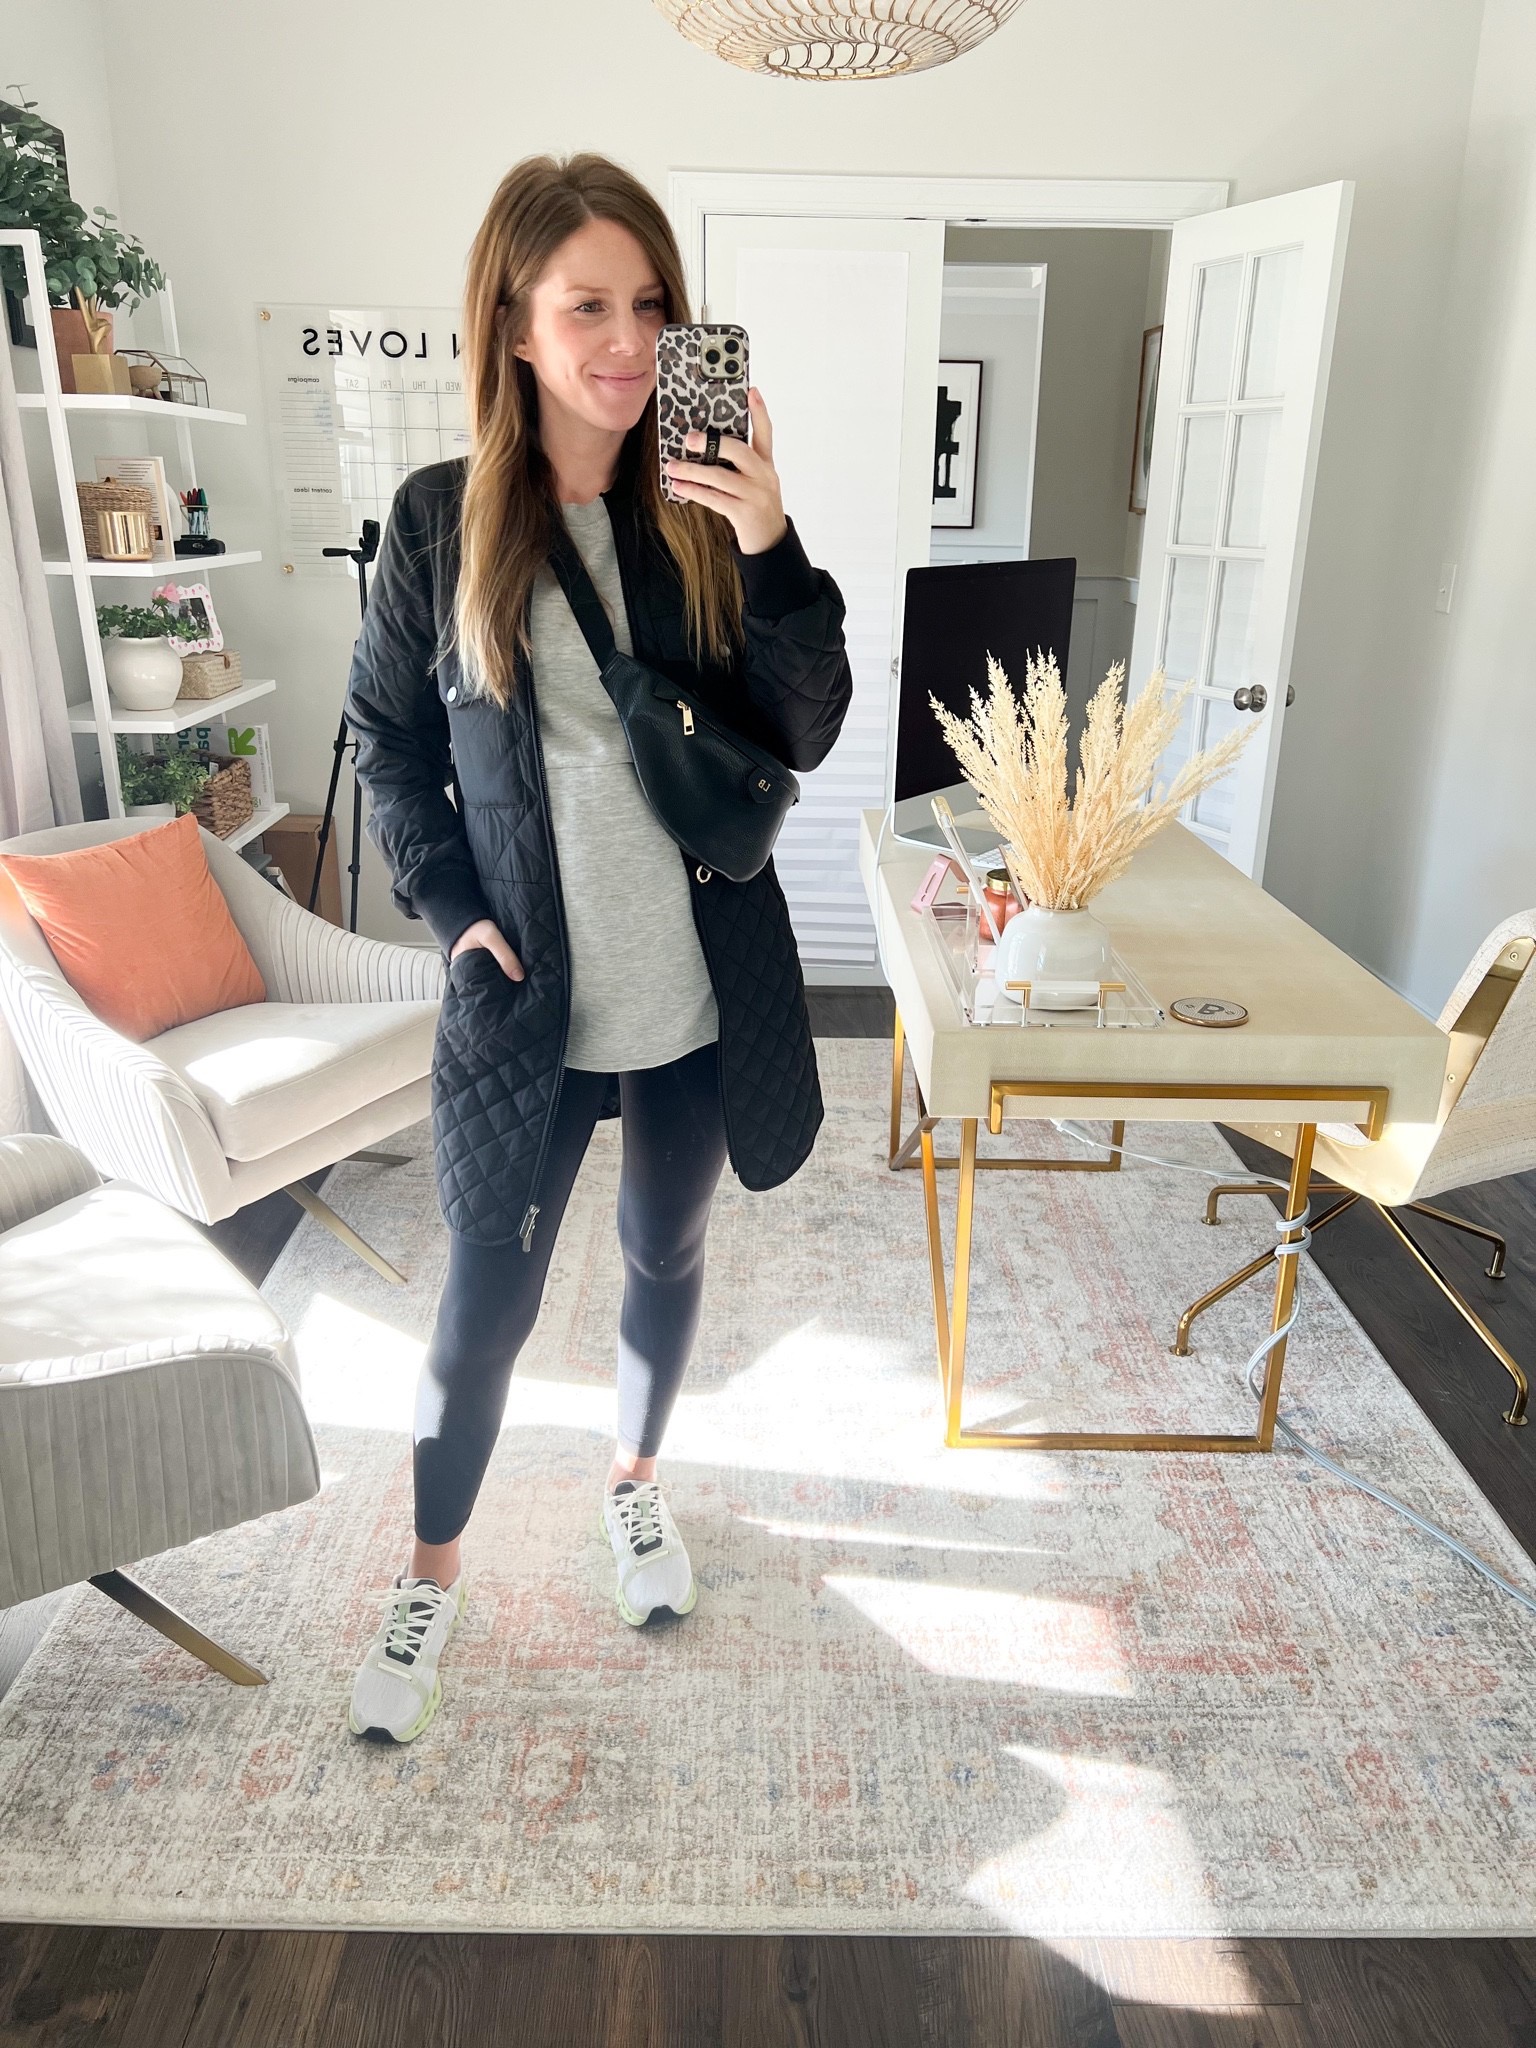 Pregnancy Clothing Must Haves - Capsule Wardrobe Essentials To Get You  Through Every Trimester + Style Ideas To Help You Feel Your Best — Lauren  Natalia